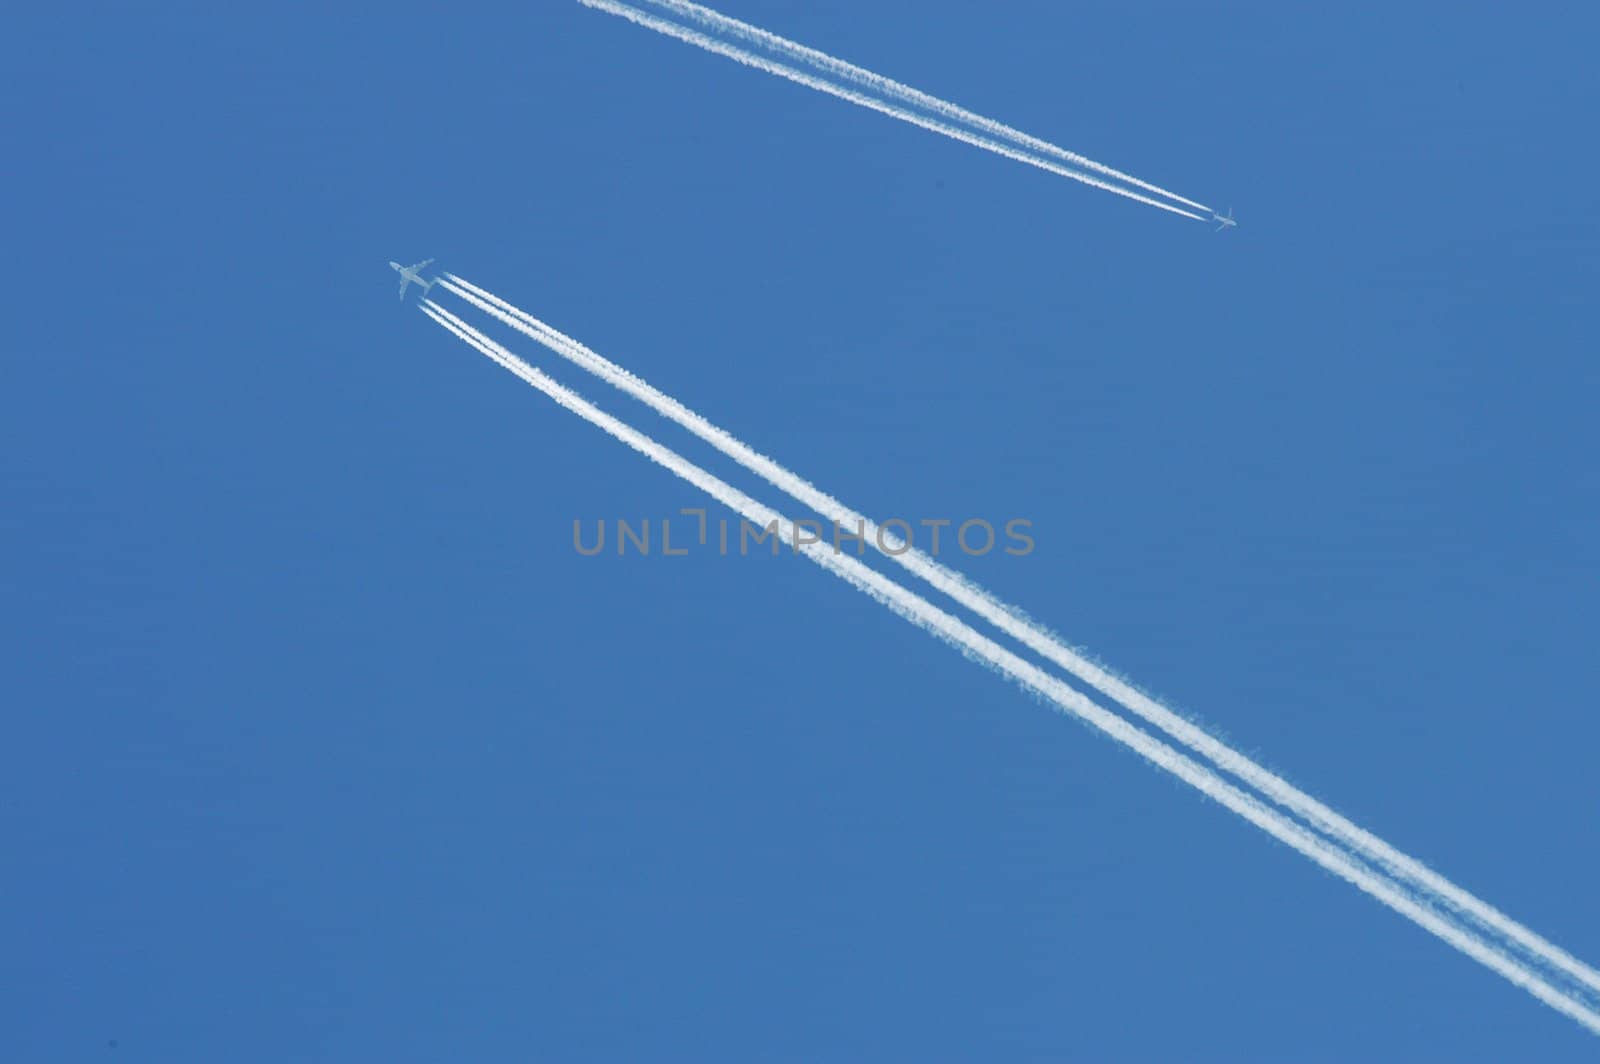 Flying airoplanes on the blue sky leaving white lines behind by haak78